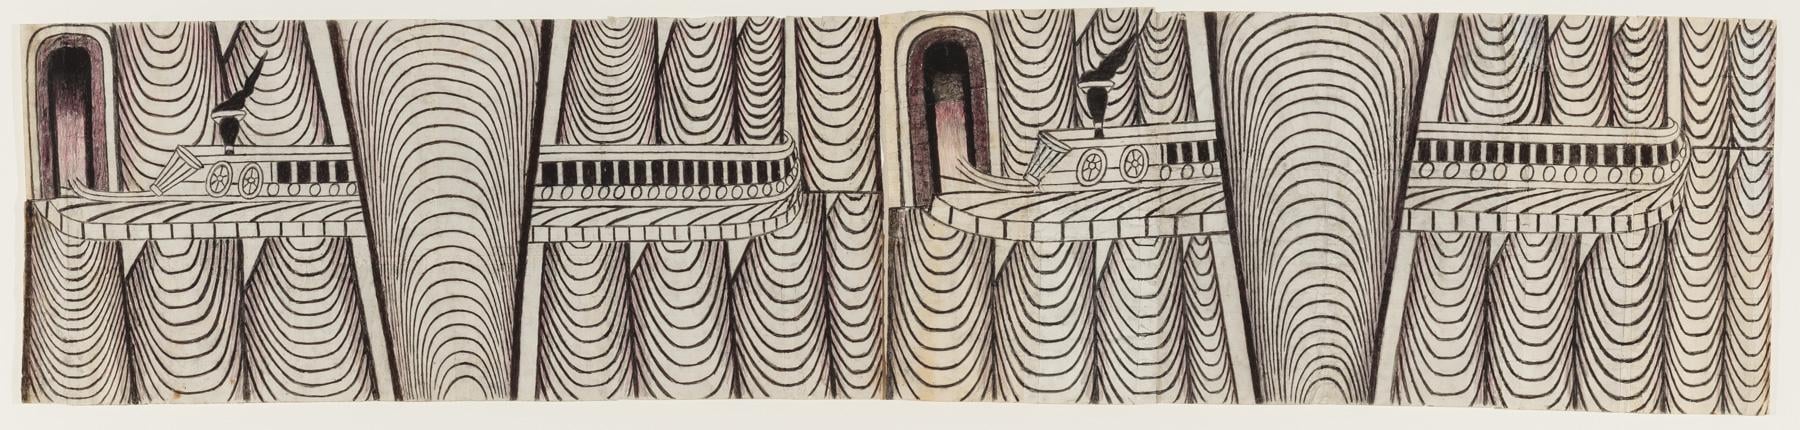 Martín Ramírez (Mexican, active in America, 1895–1963). Untitled (Trains and Tunnels) A, B, (detail), c. 1960–63. Graphite, gouache, crayon and colored pencil on pieced paper, 17 x 78 in. (43.2 x 198.1 cm). Collection of Victor F. Keen. Copyright Estate of Martín Ramírez 